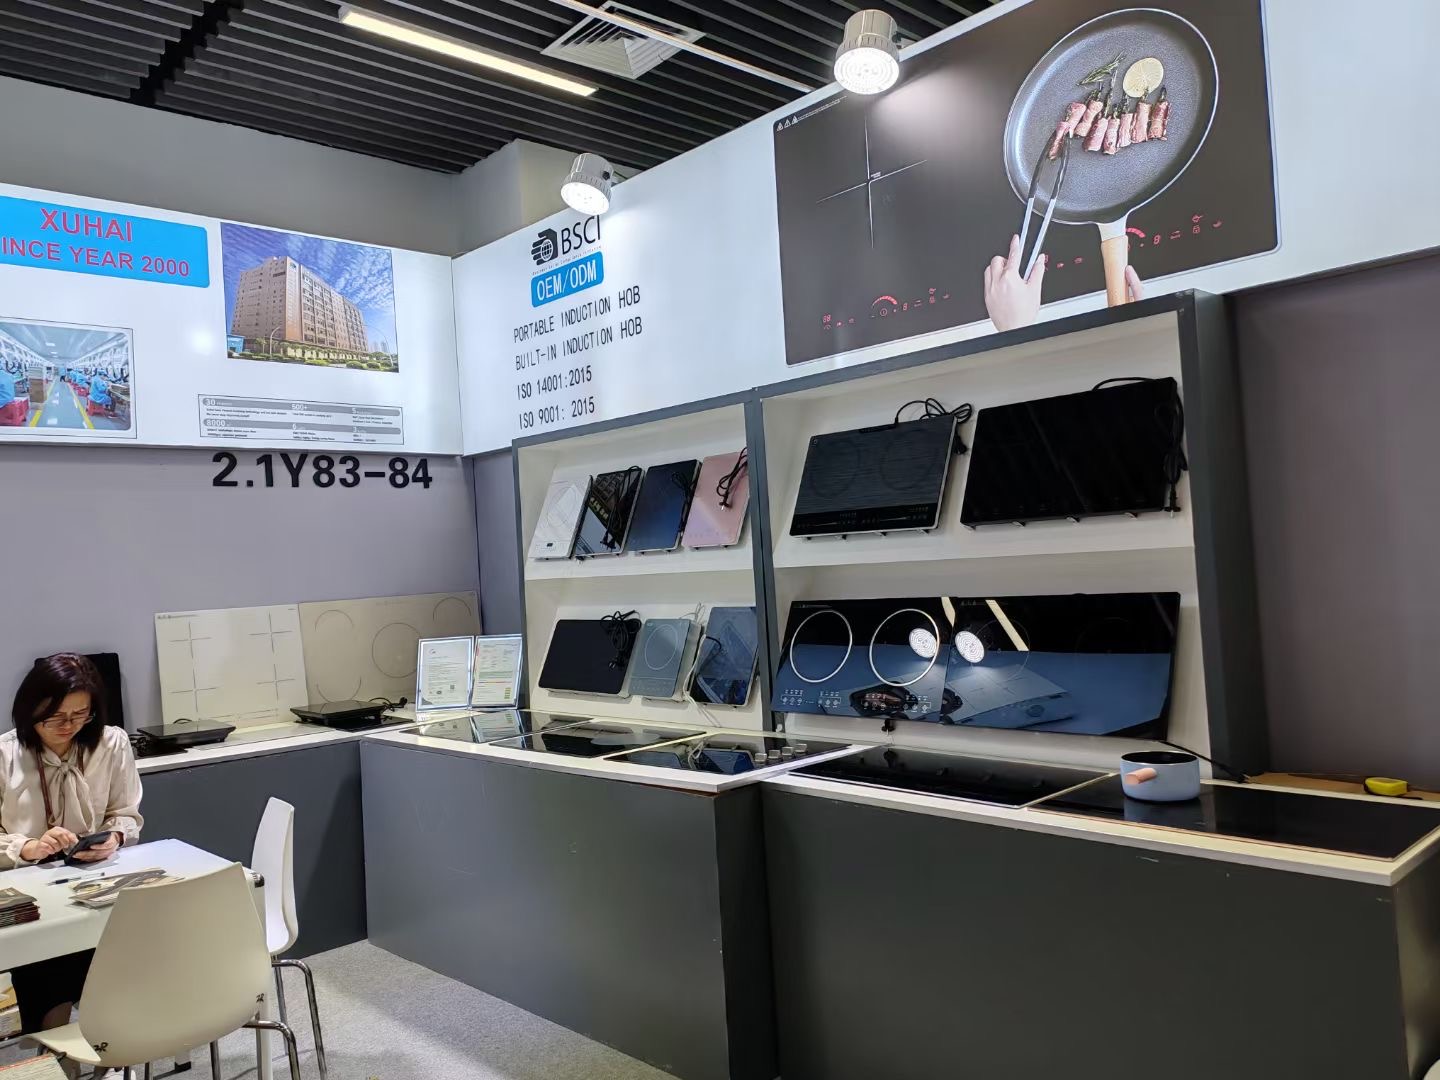 Welcome to my booth at Canton Fair!